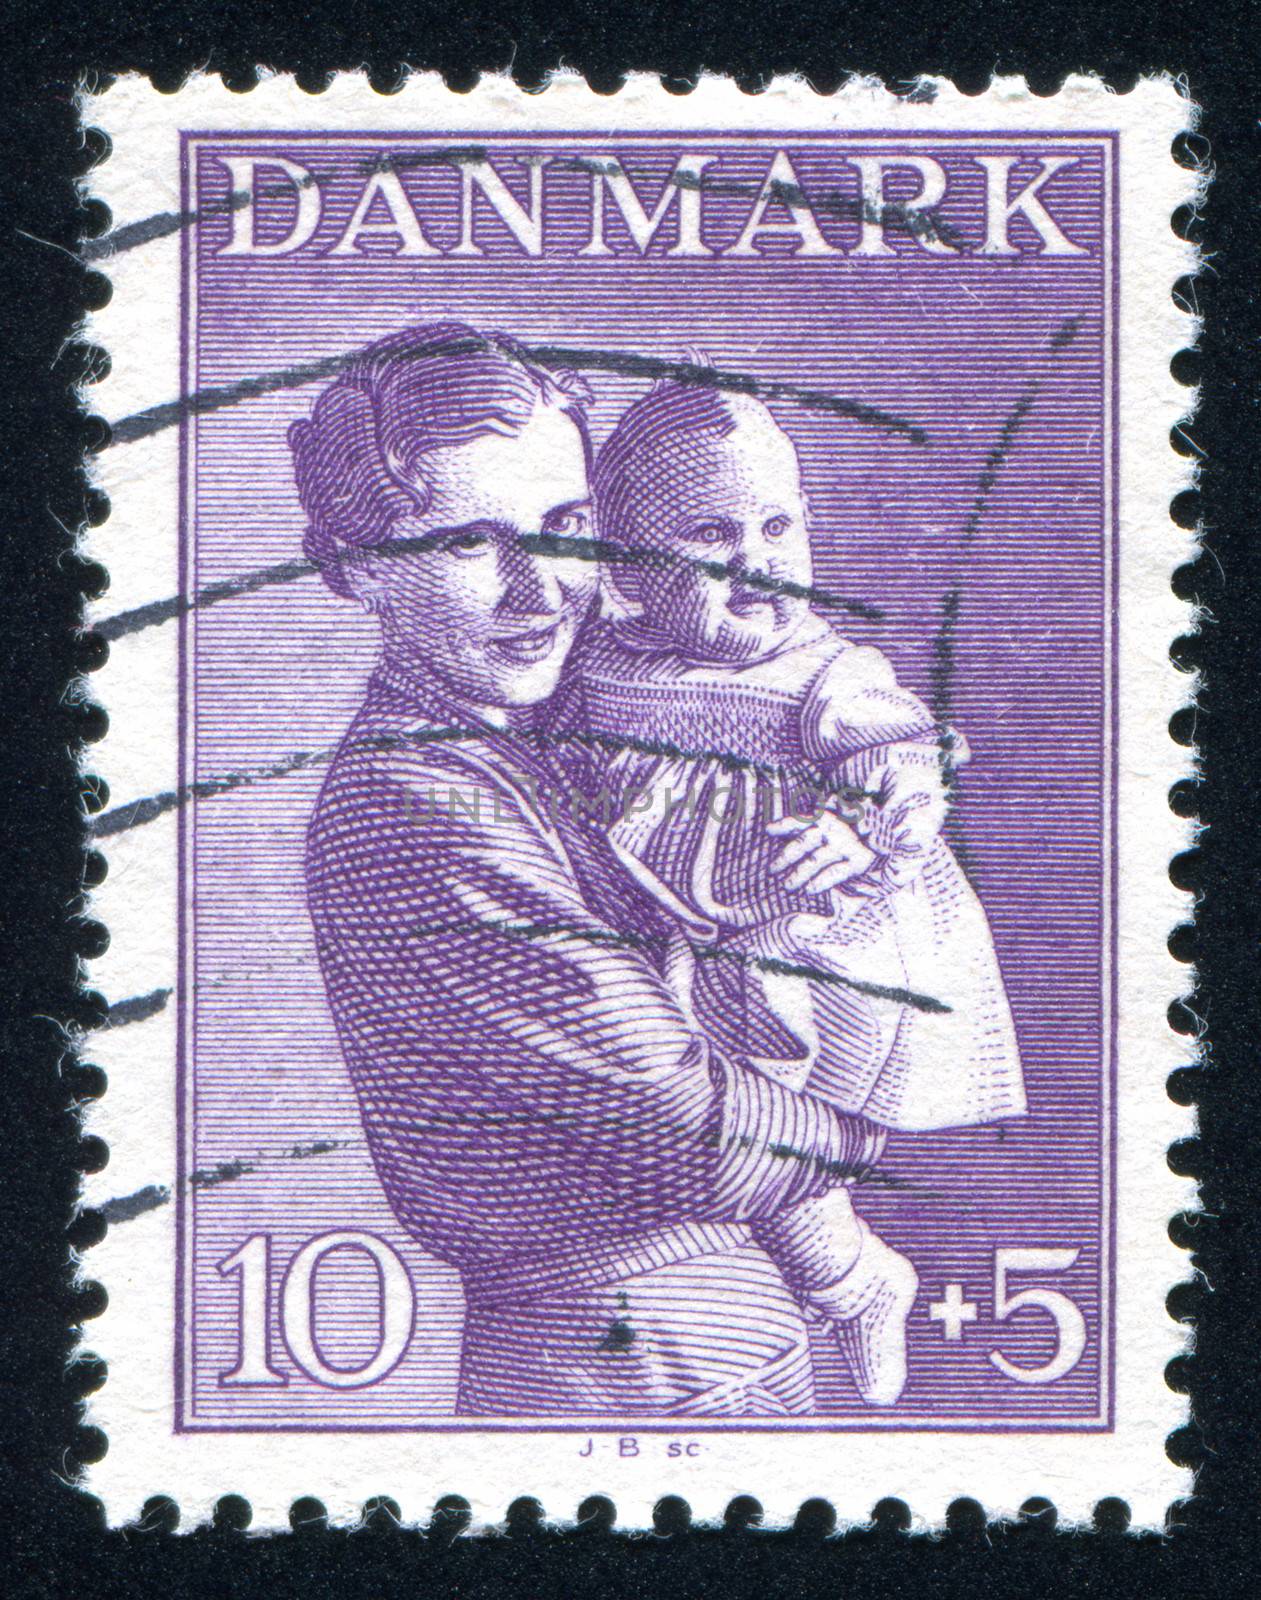 DENMARK - CIRCA 1941: stamp printed by Denmark, shows Woman and child, circa 1941